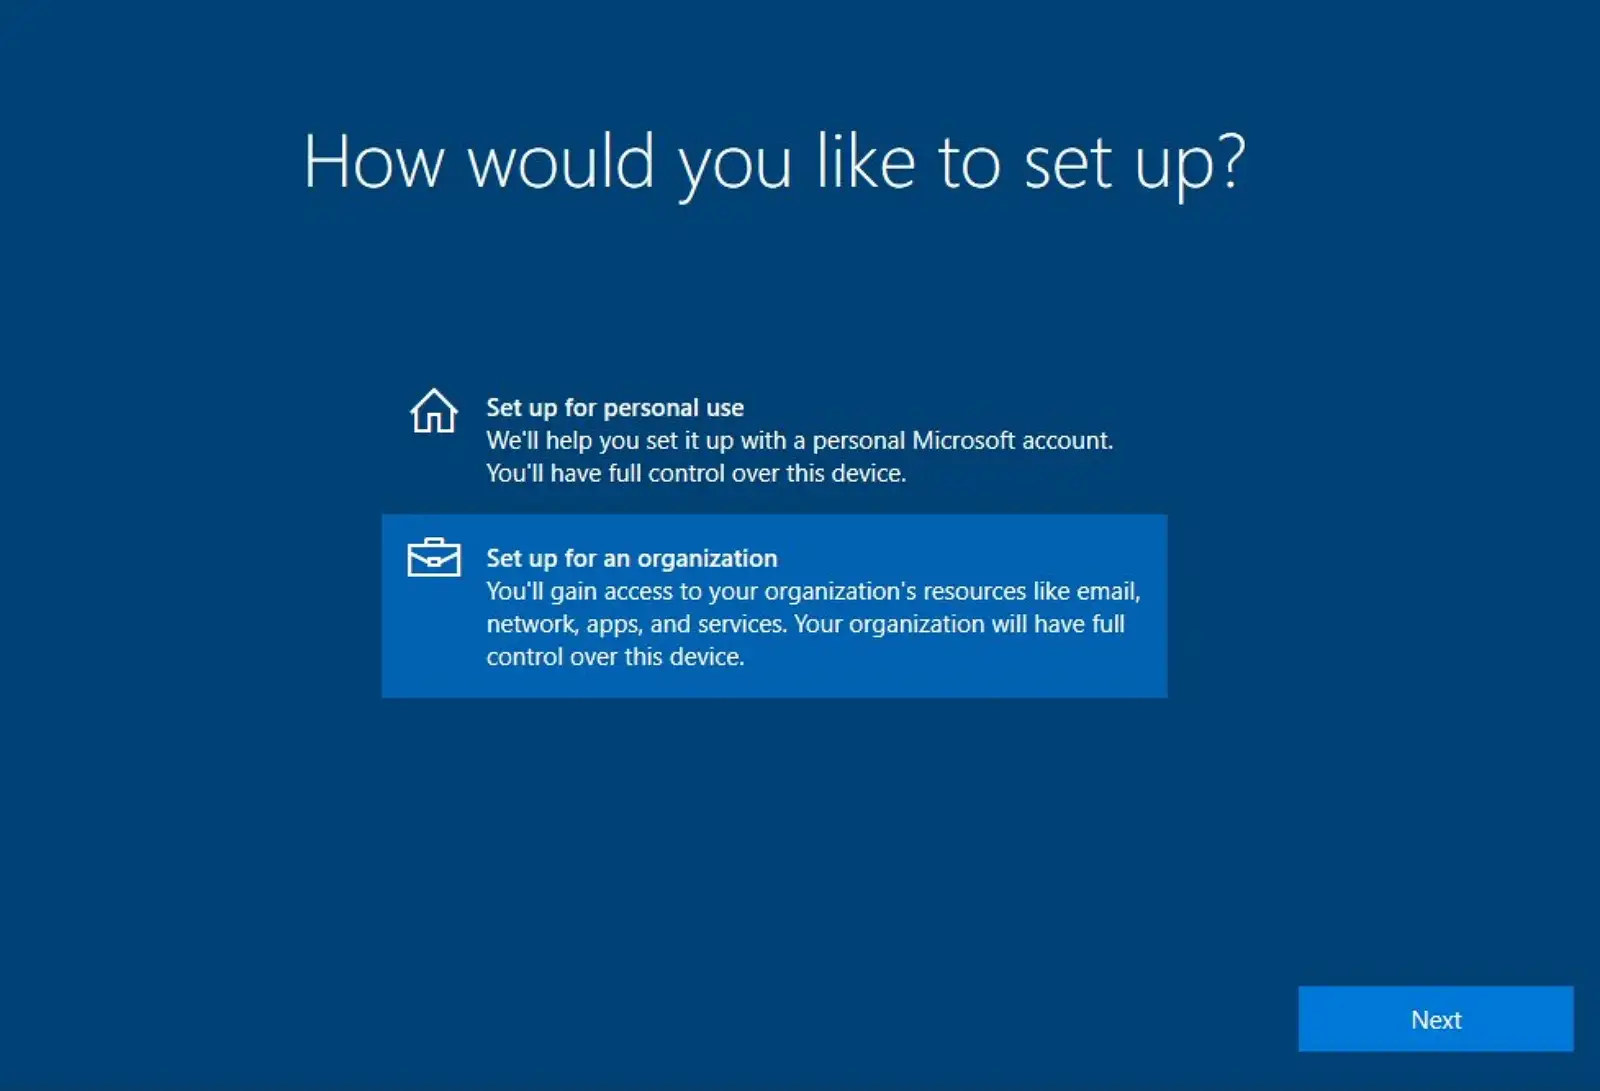 How to Log In to Windows 10 without a Microsoft Account